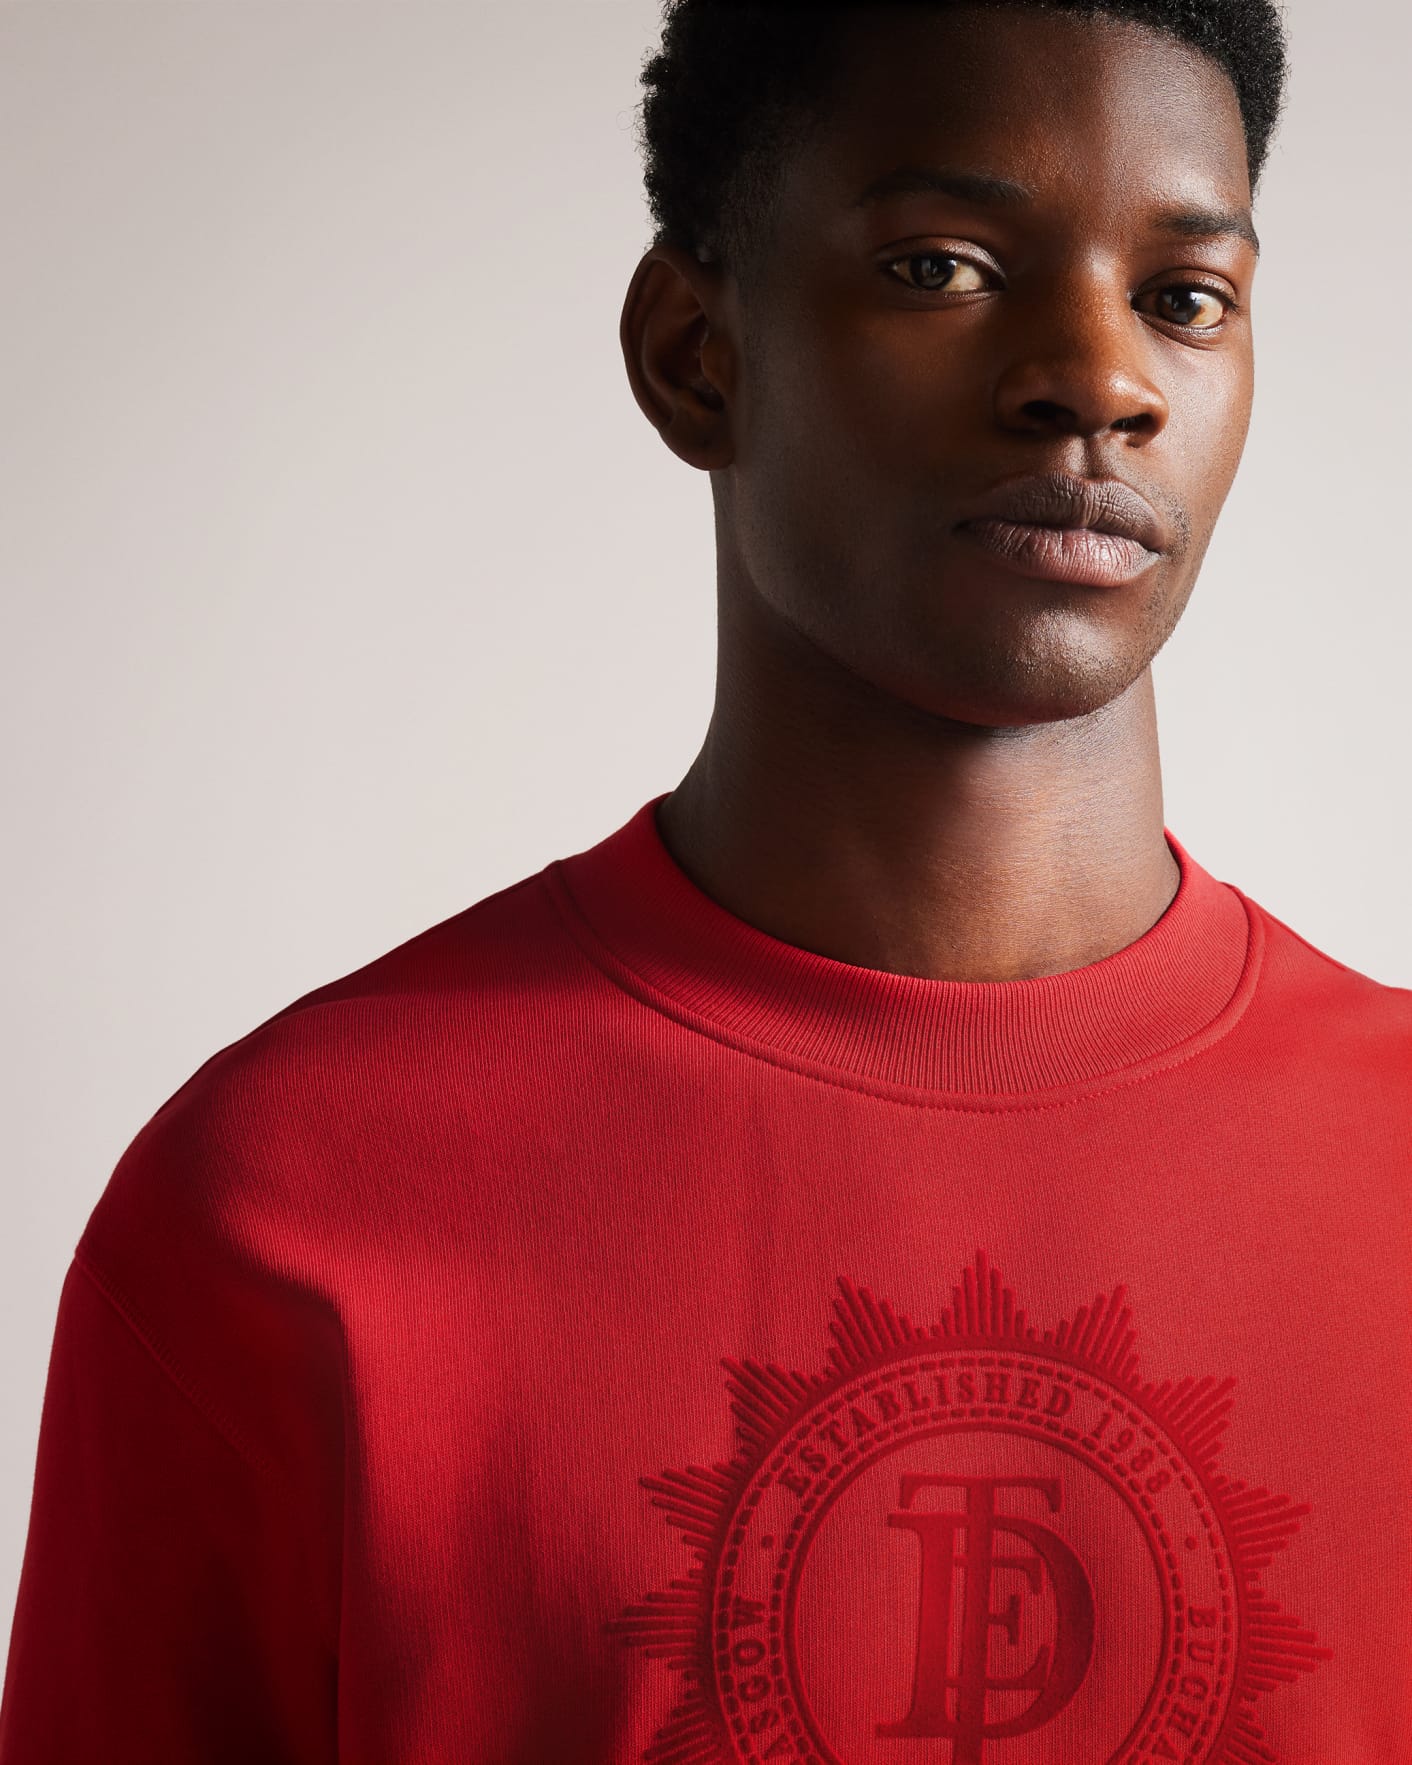 Red Long Sleeve Relaxed Graphic Sweatshirt Ted Baker